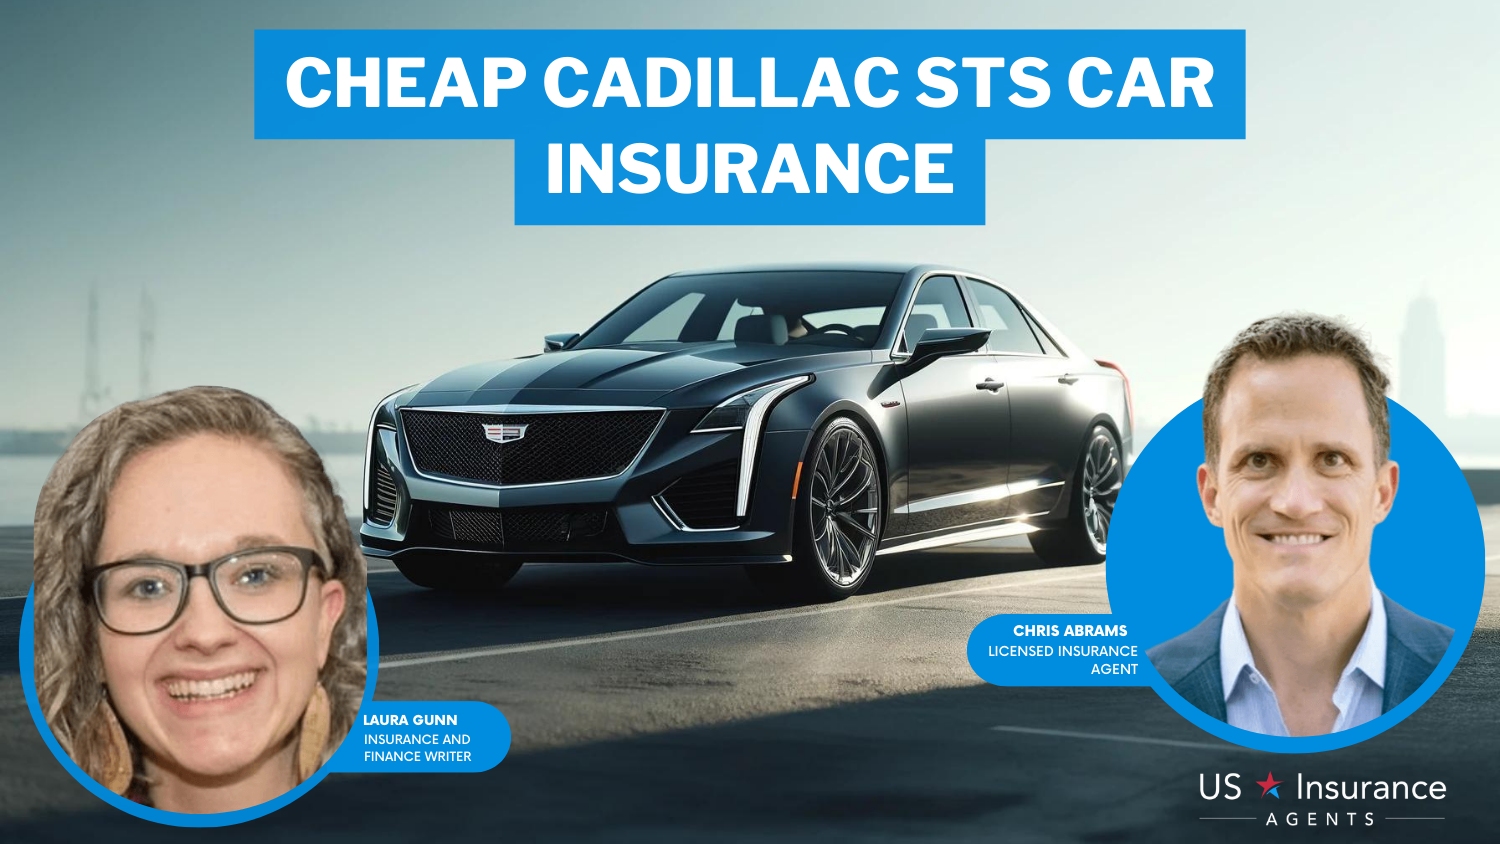 Nationwide, The Hartford, and USAA: Cheap Cadillac STS Car Insurance